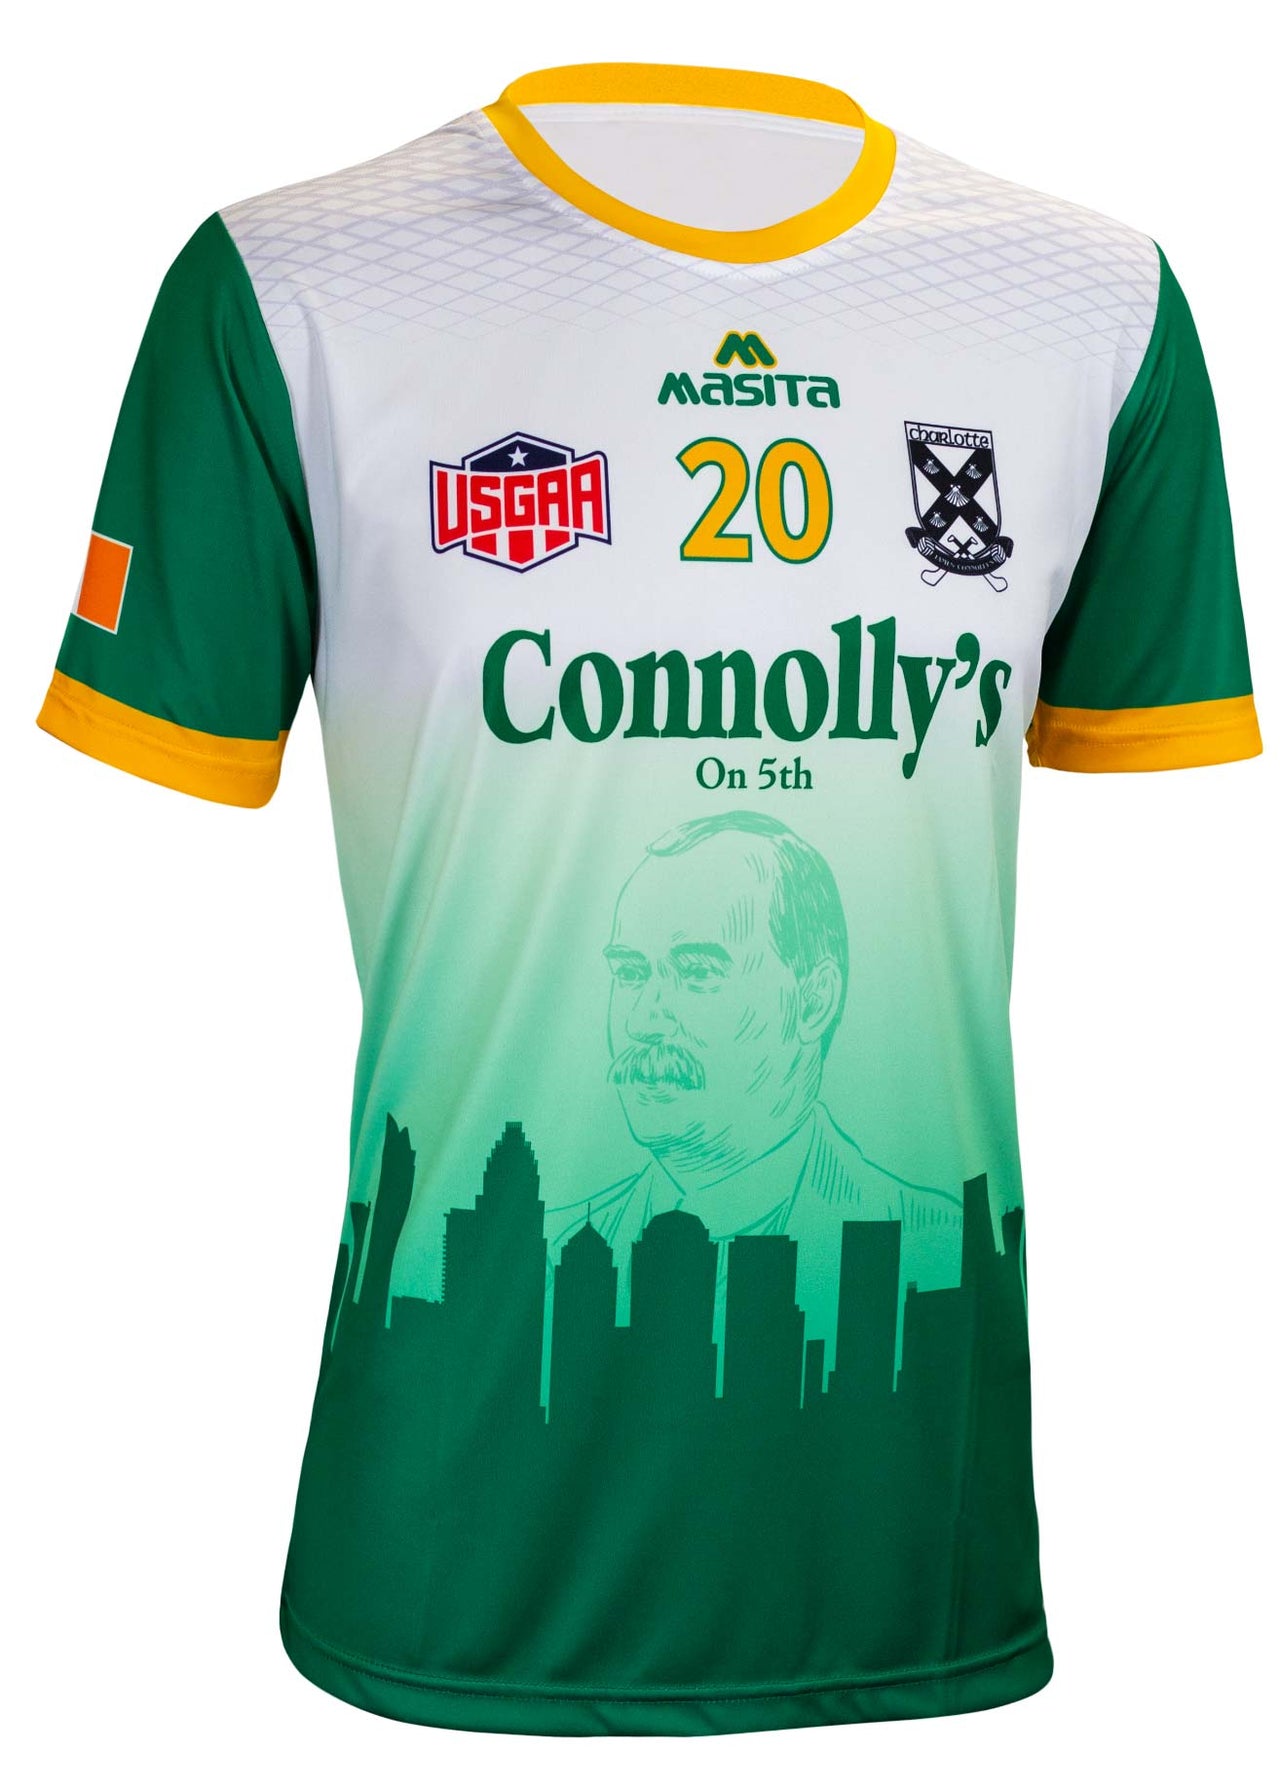 Charlotte James Connolly's 20th Year Anniversary Jersey Regular Fit Adult